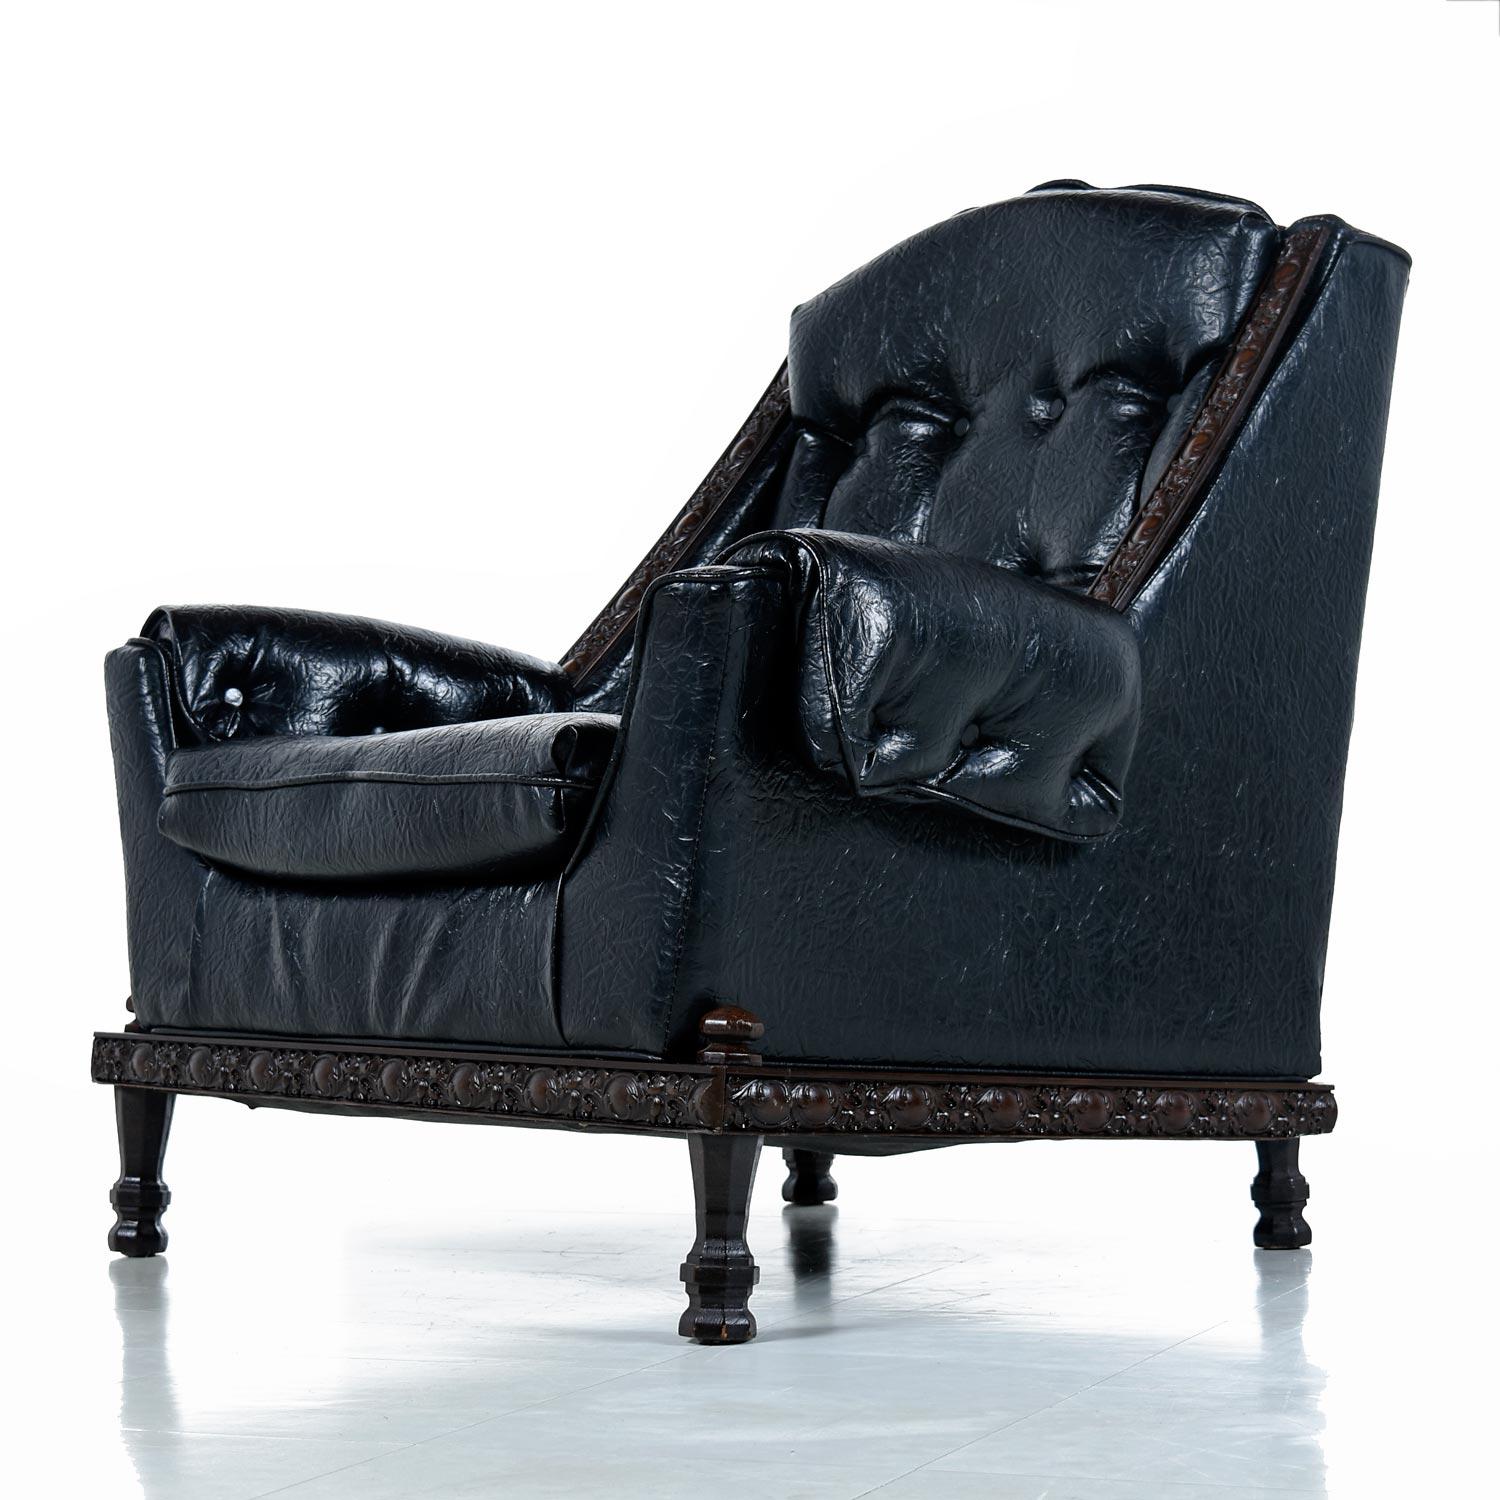 If you are looking for the perfect chair for your man cave, look no more. This thing oozes machismo with it’s original, heavily textured black vinyl upholstery and ornately carved solid wood trim. This handsome recliner isn’t all looks. The wide,